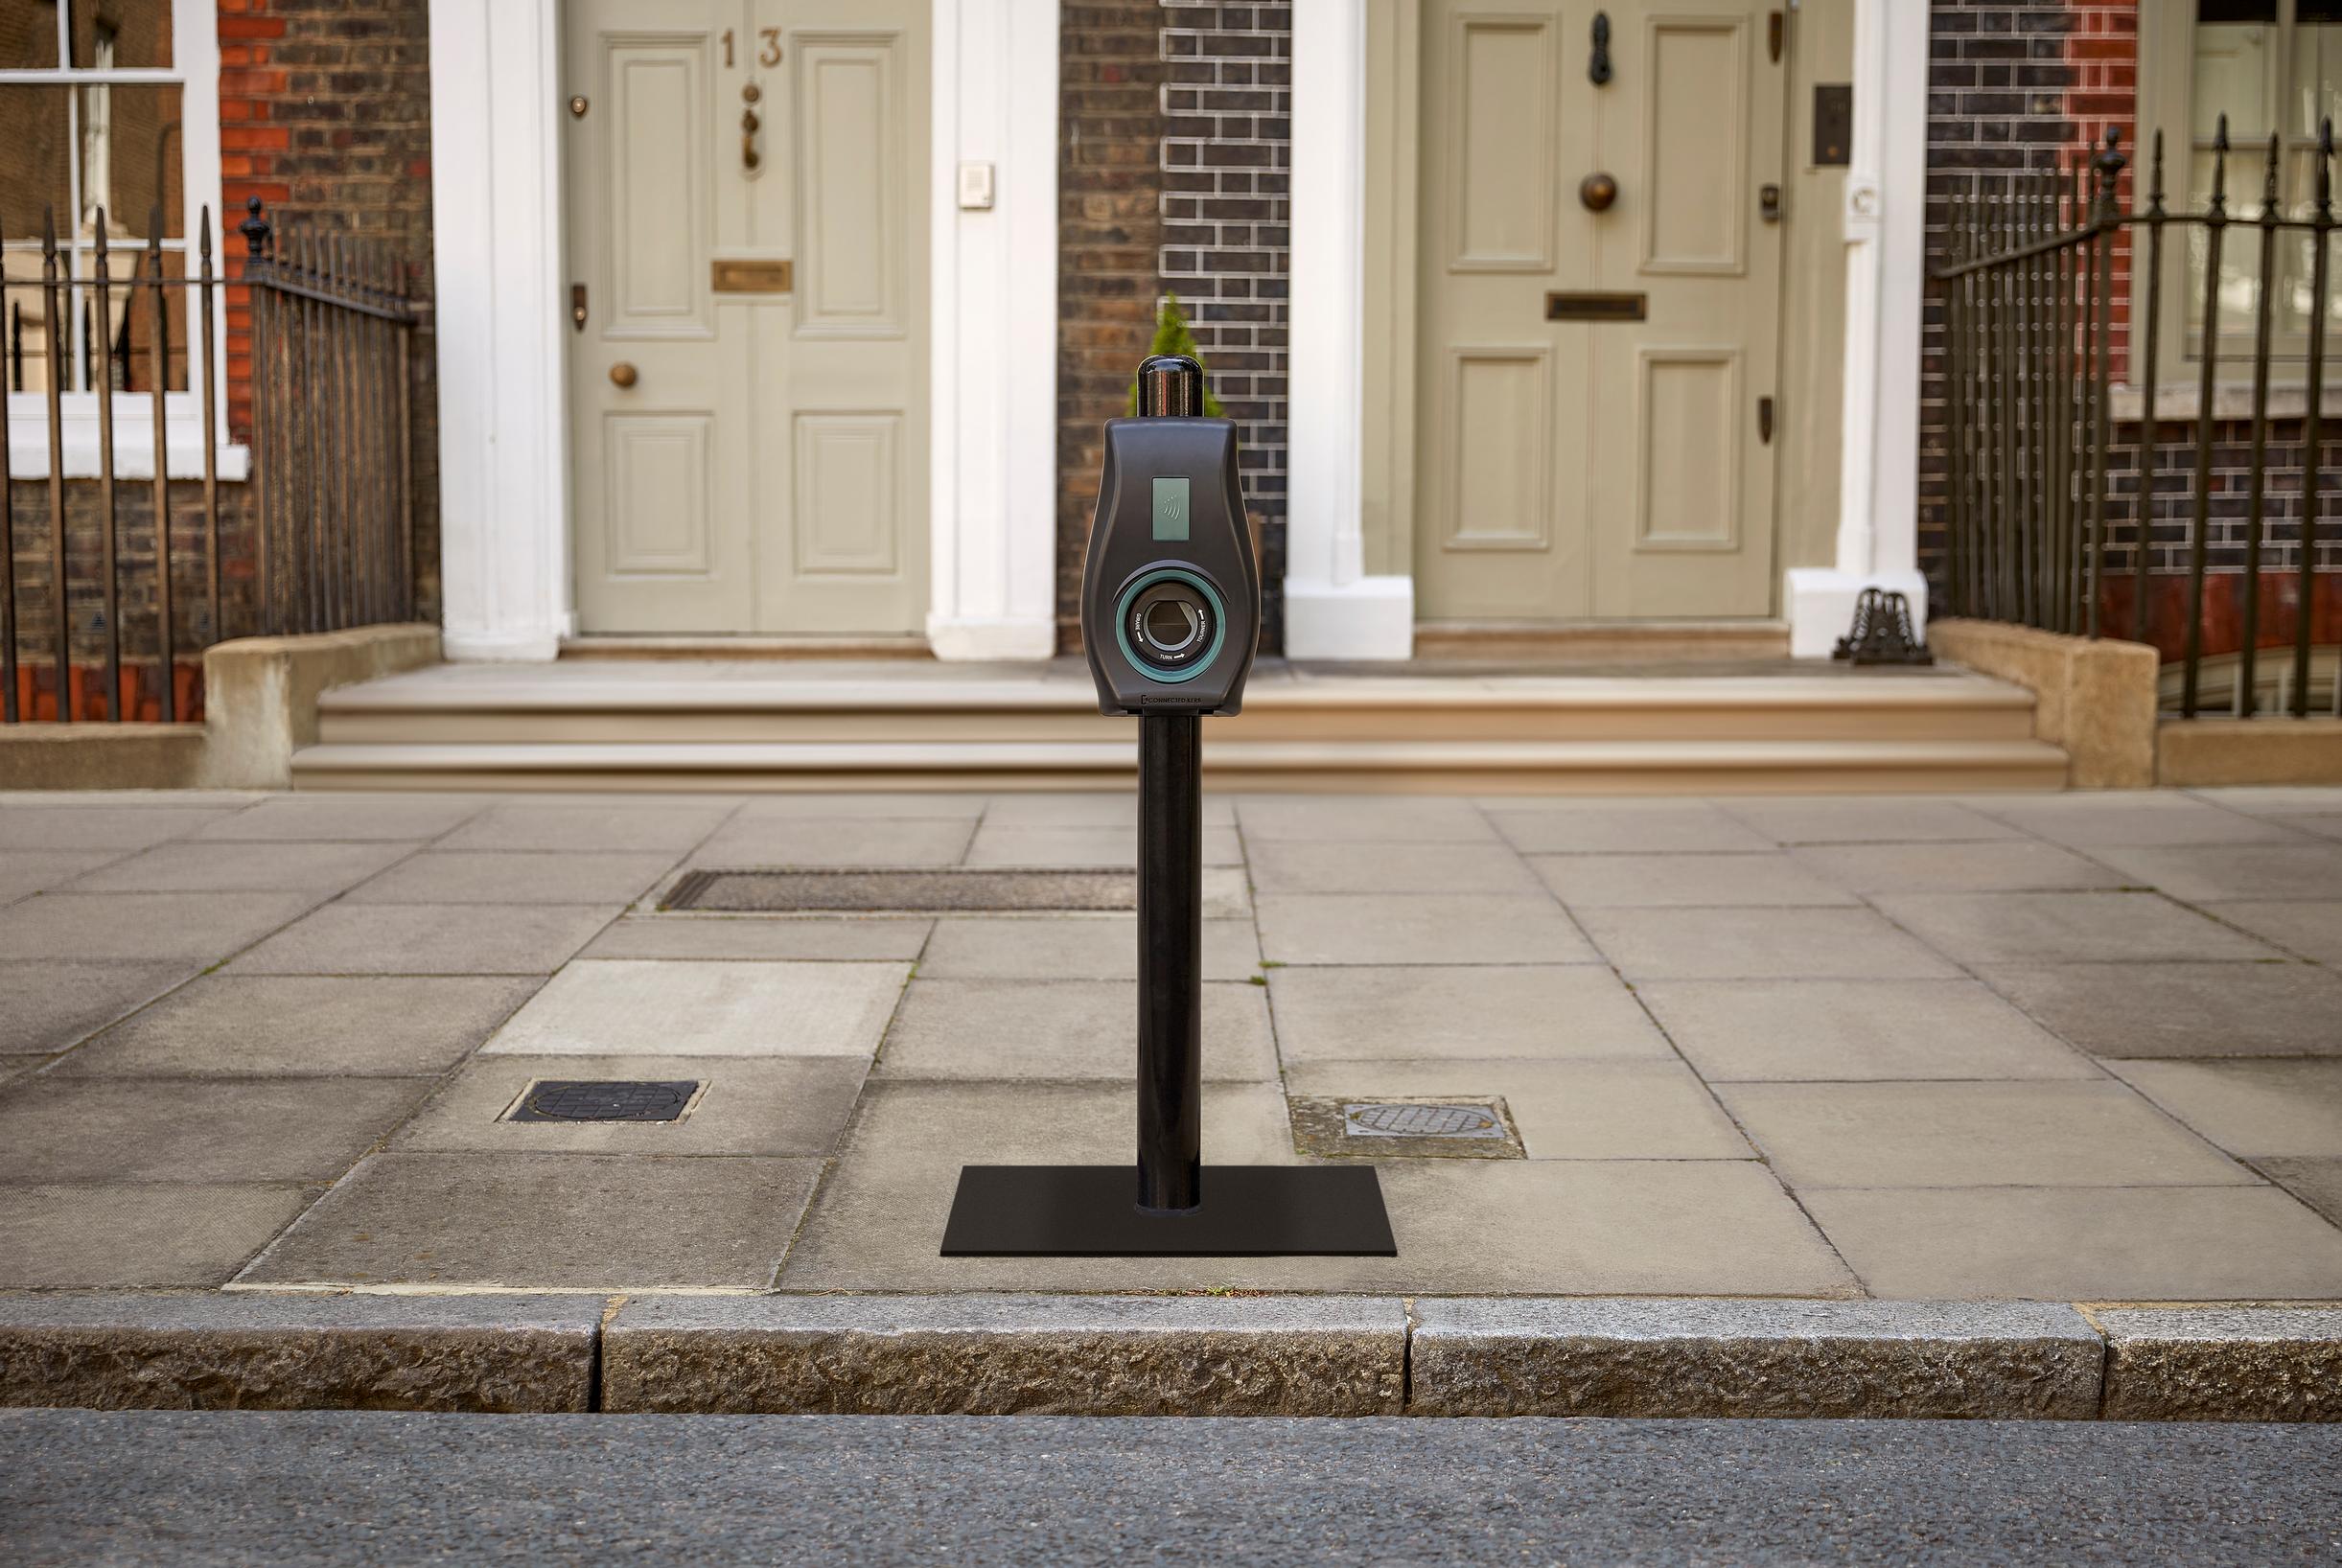 Connected Kerb selected for New York charging pilot project